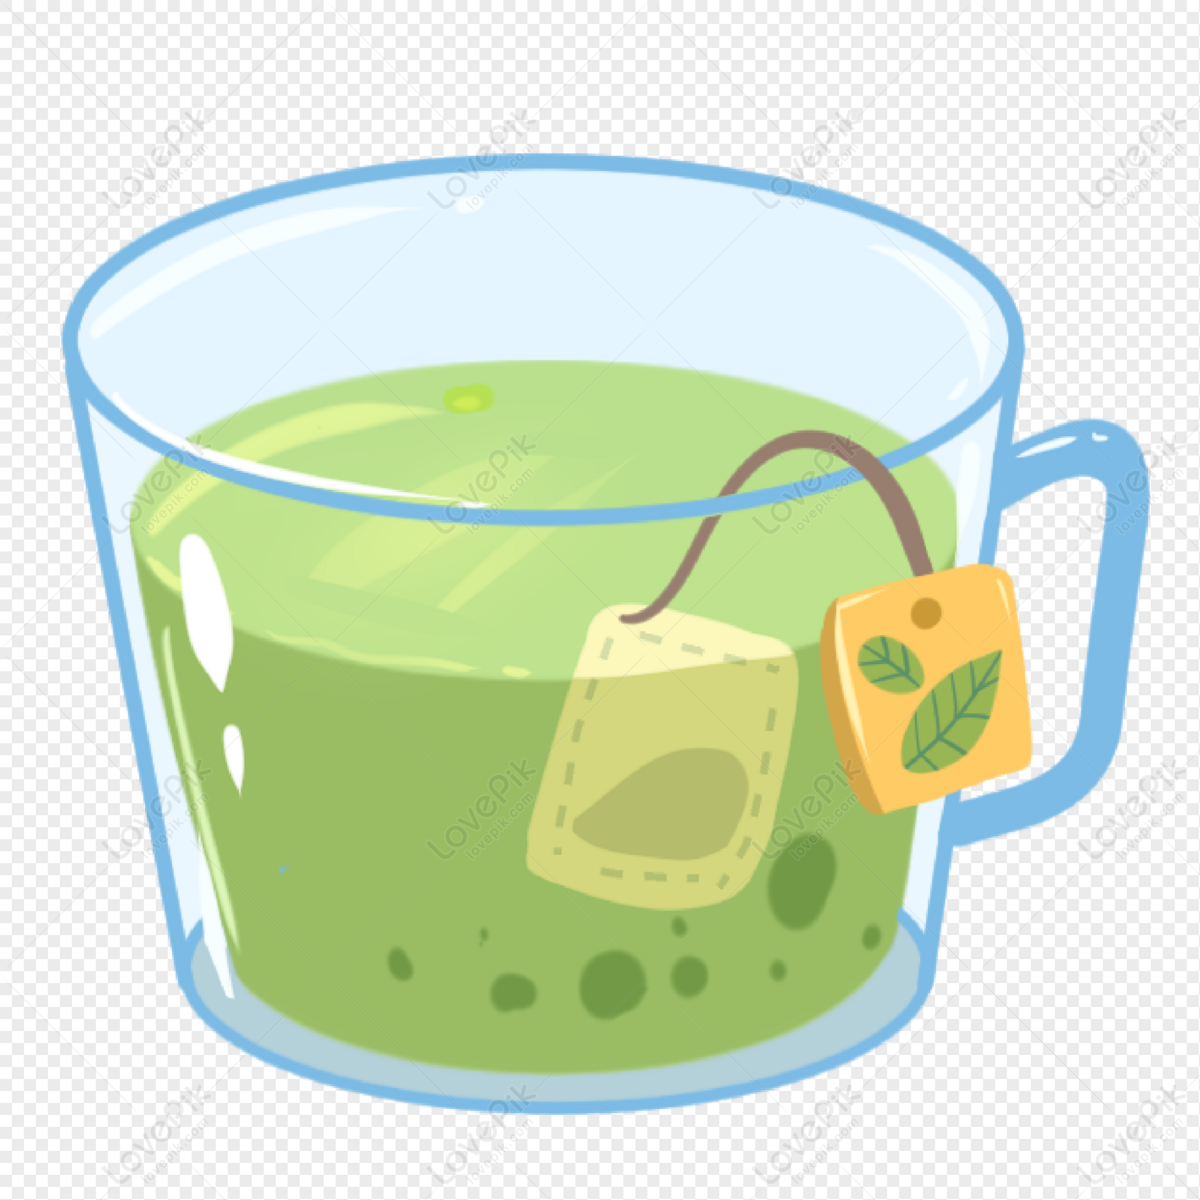 Green Tea PNG Transparent Background And Clipart Image For Free Download -  Lovepik | 401291940